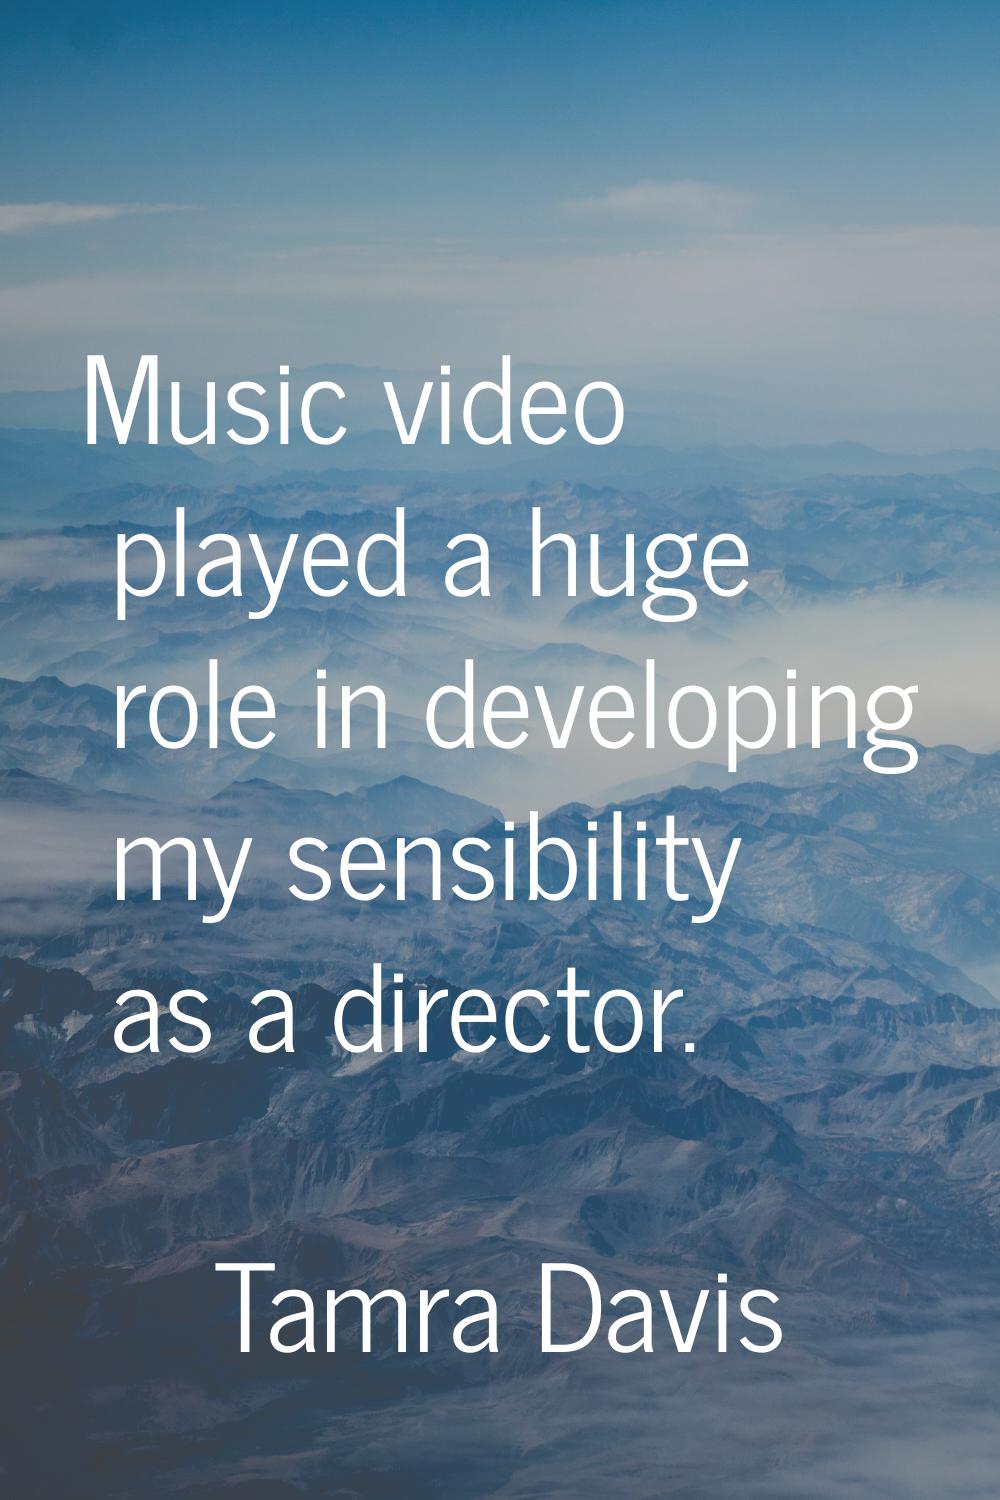 Music video played a huge role in developing my sensibility as a director.